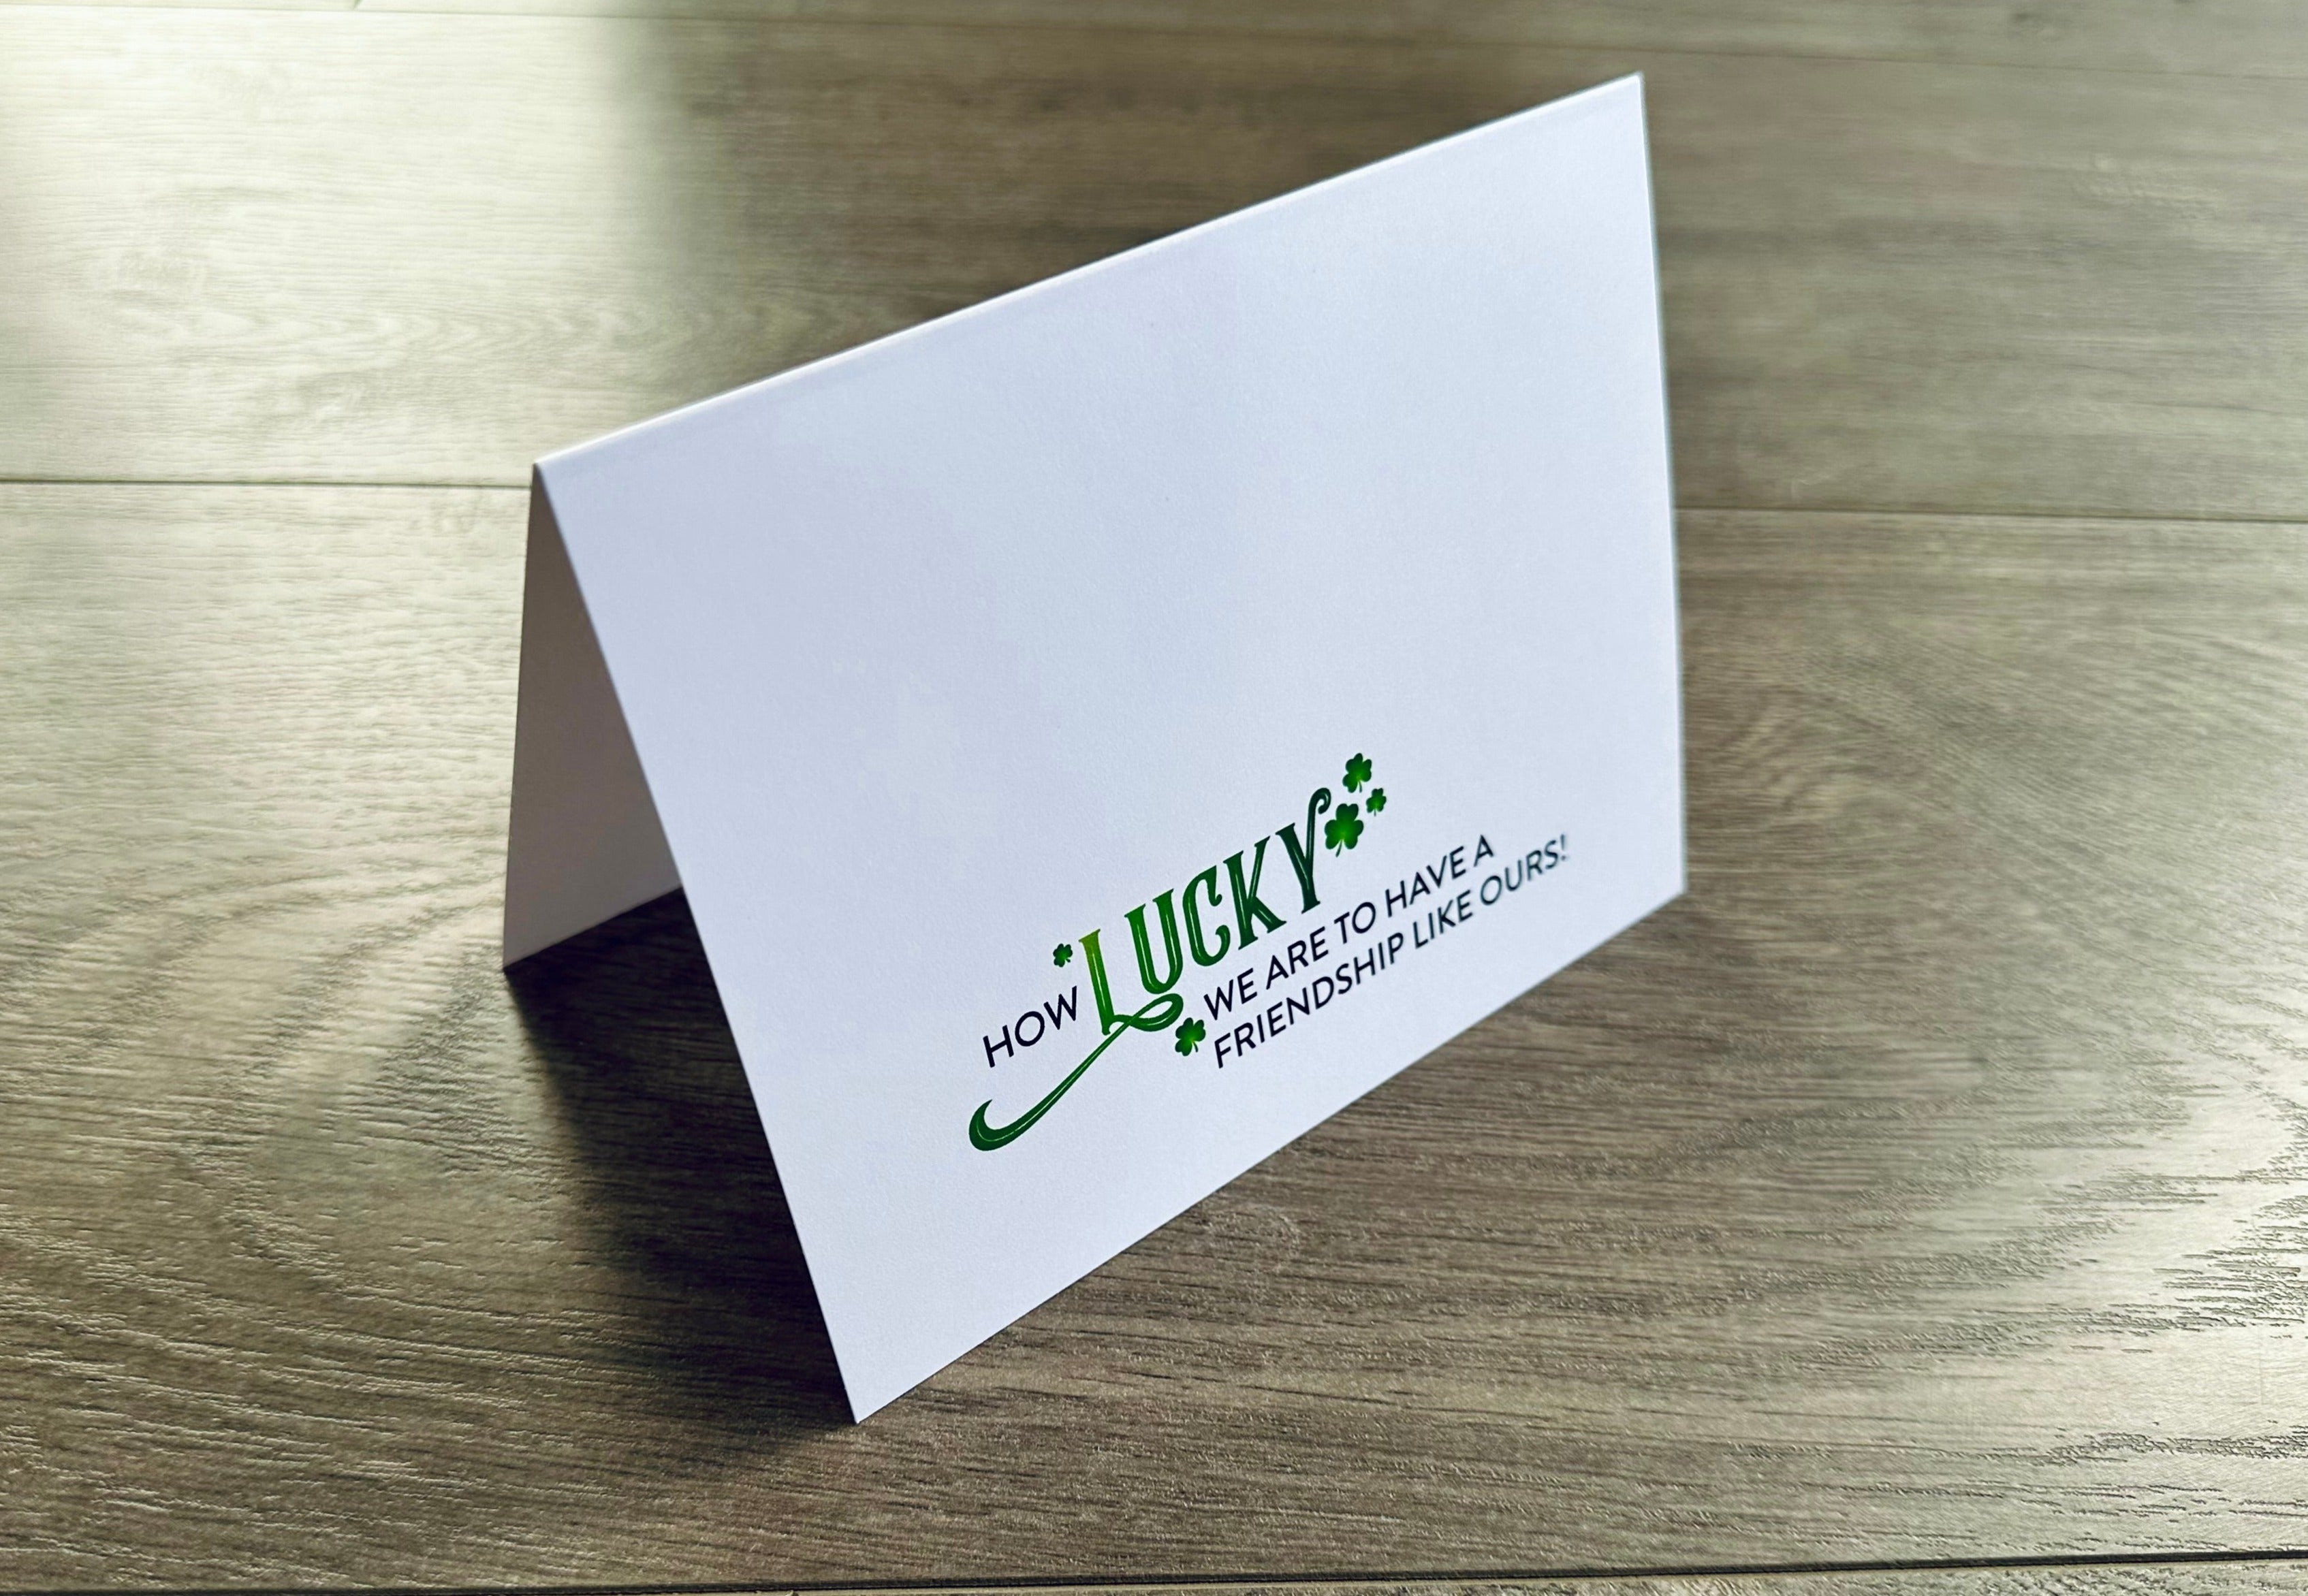 A white folded notecard reads, "How lucky we are to have a friendship like ours!" Friendship Luck by Stationare.